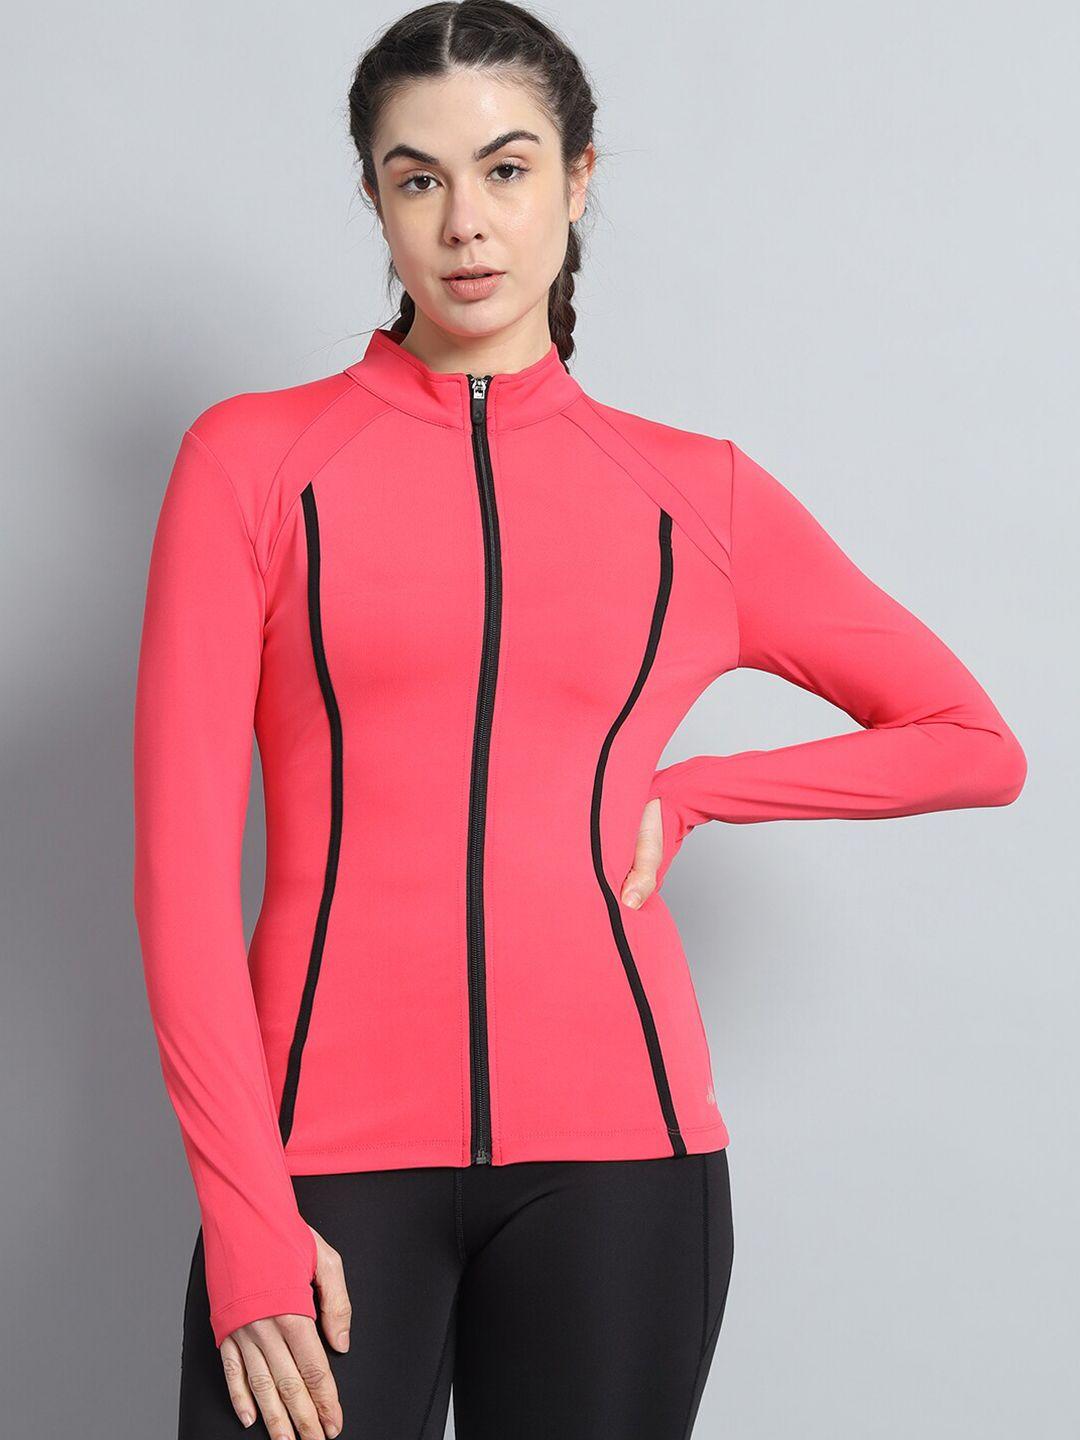 athlisis dry-fit lightweight training or gym sporty jacket